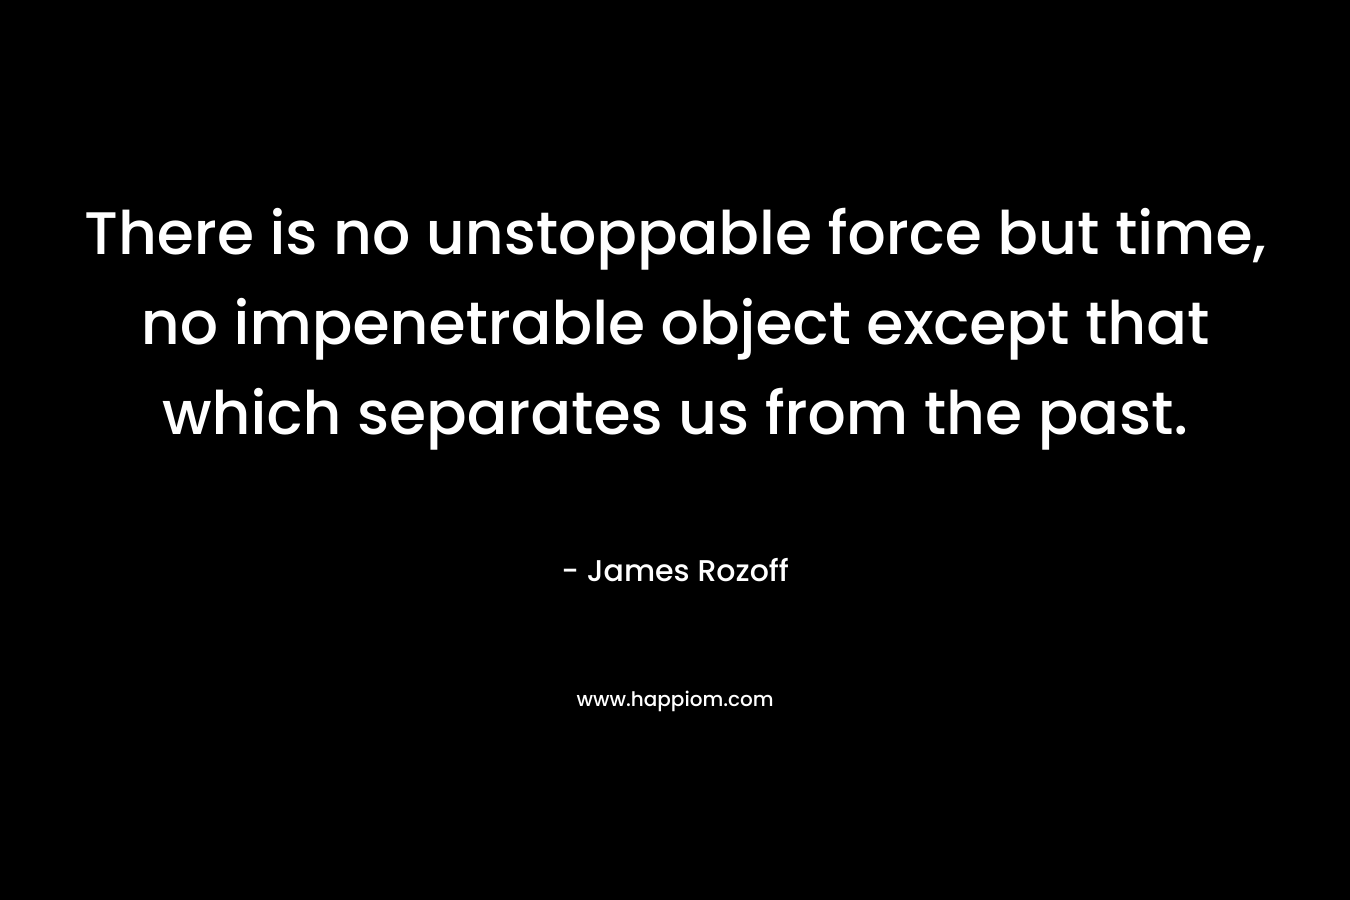 There is no unstoppable force but time, no impenetrable object except that which separates us from the past. – James Rozoff